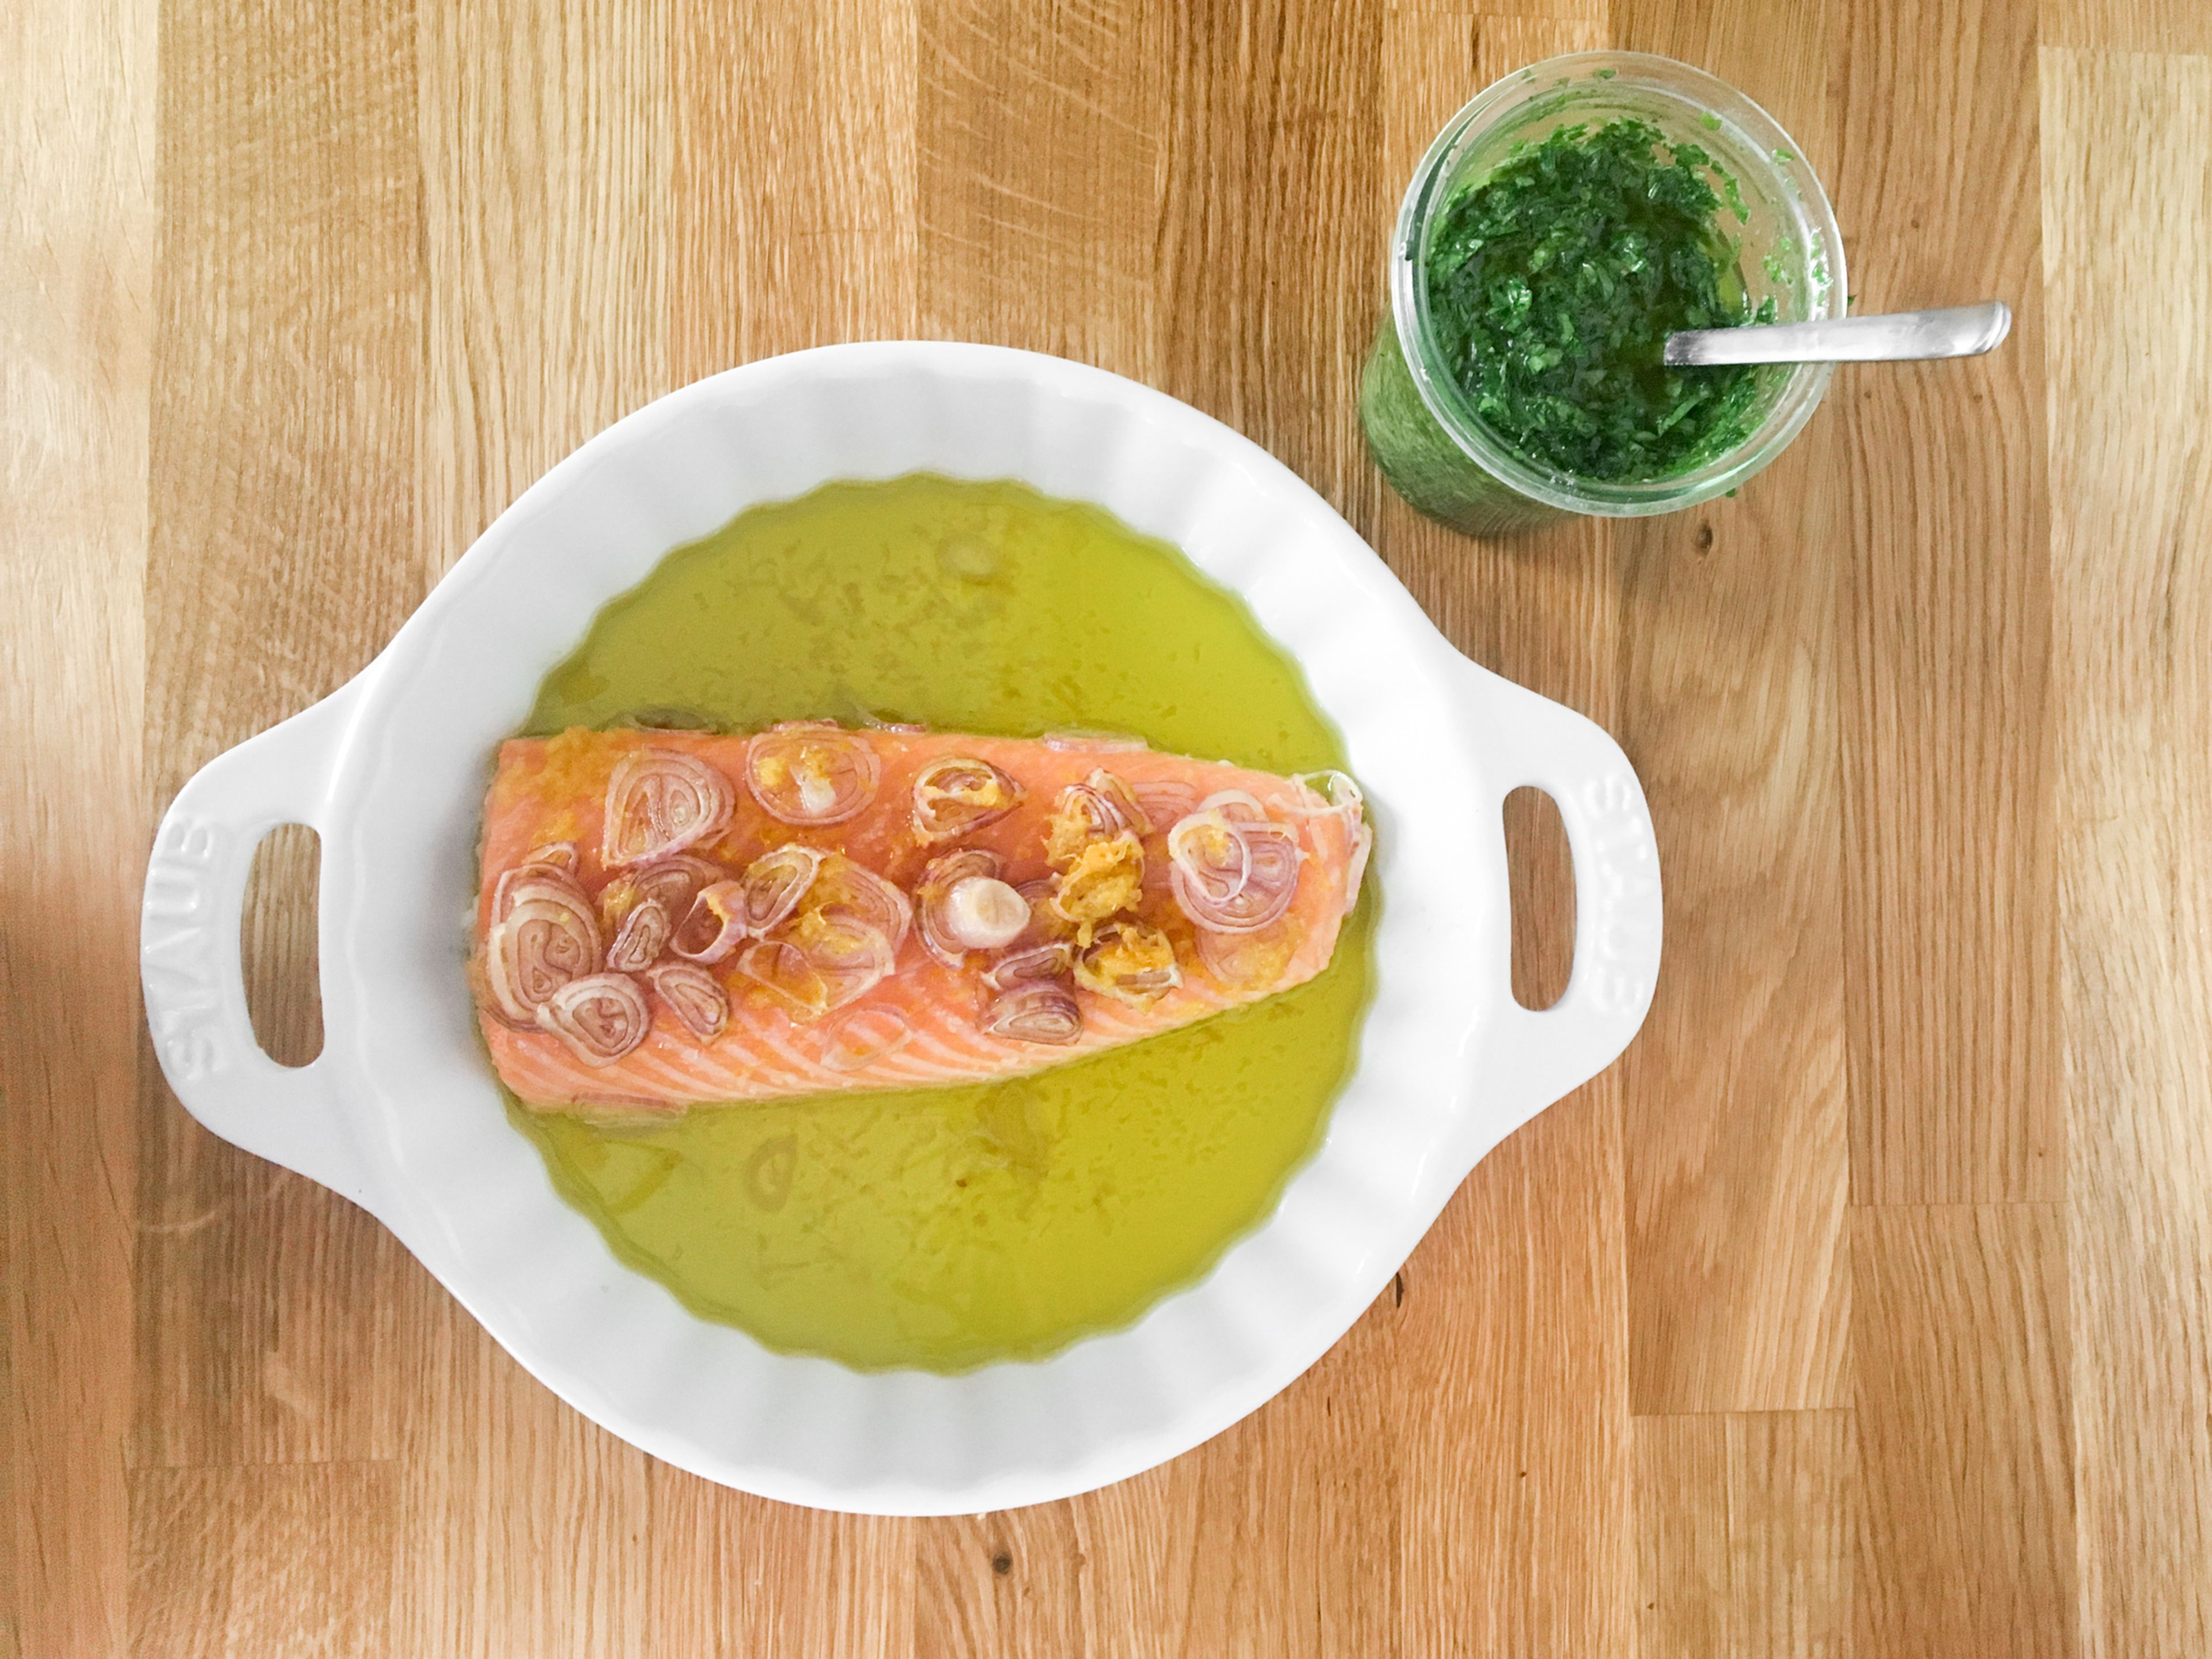 In the meantime, prepare the salsa verde. Halve and juice the lemon. Finely chop the wild garlic, parsley, and mint. Add herbs to a bowl with Dijon mustard, lemon juice, and remaining olive oil. Season with salt and pepper. Serve roasted salmon with wild garlic salsa verde. Enjoy!